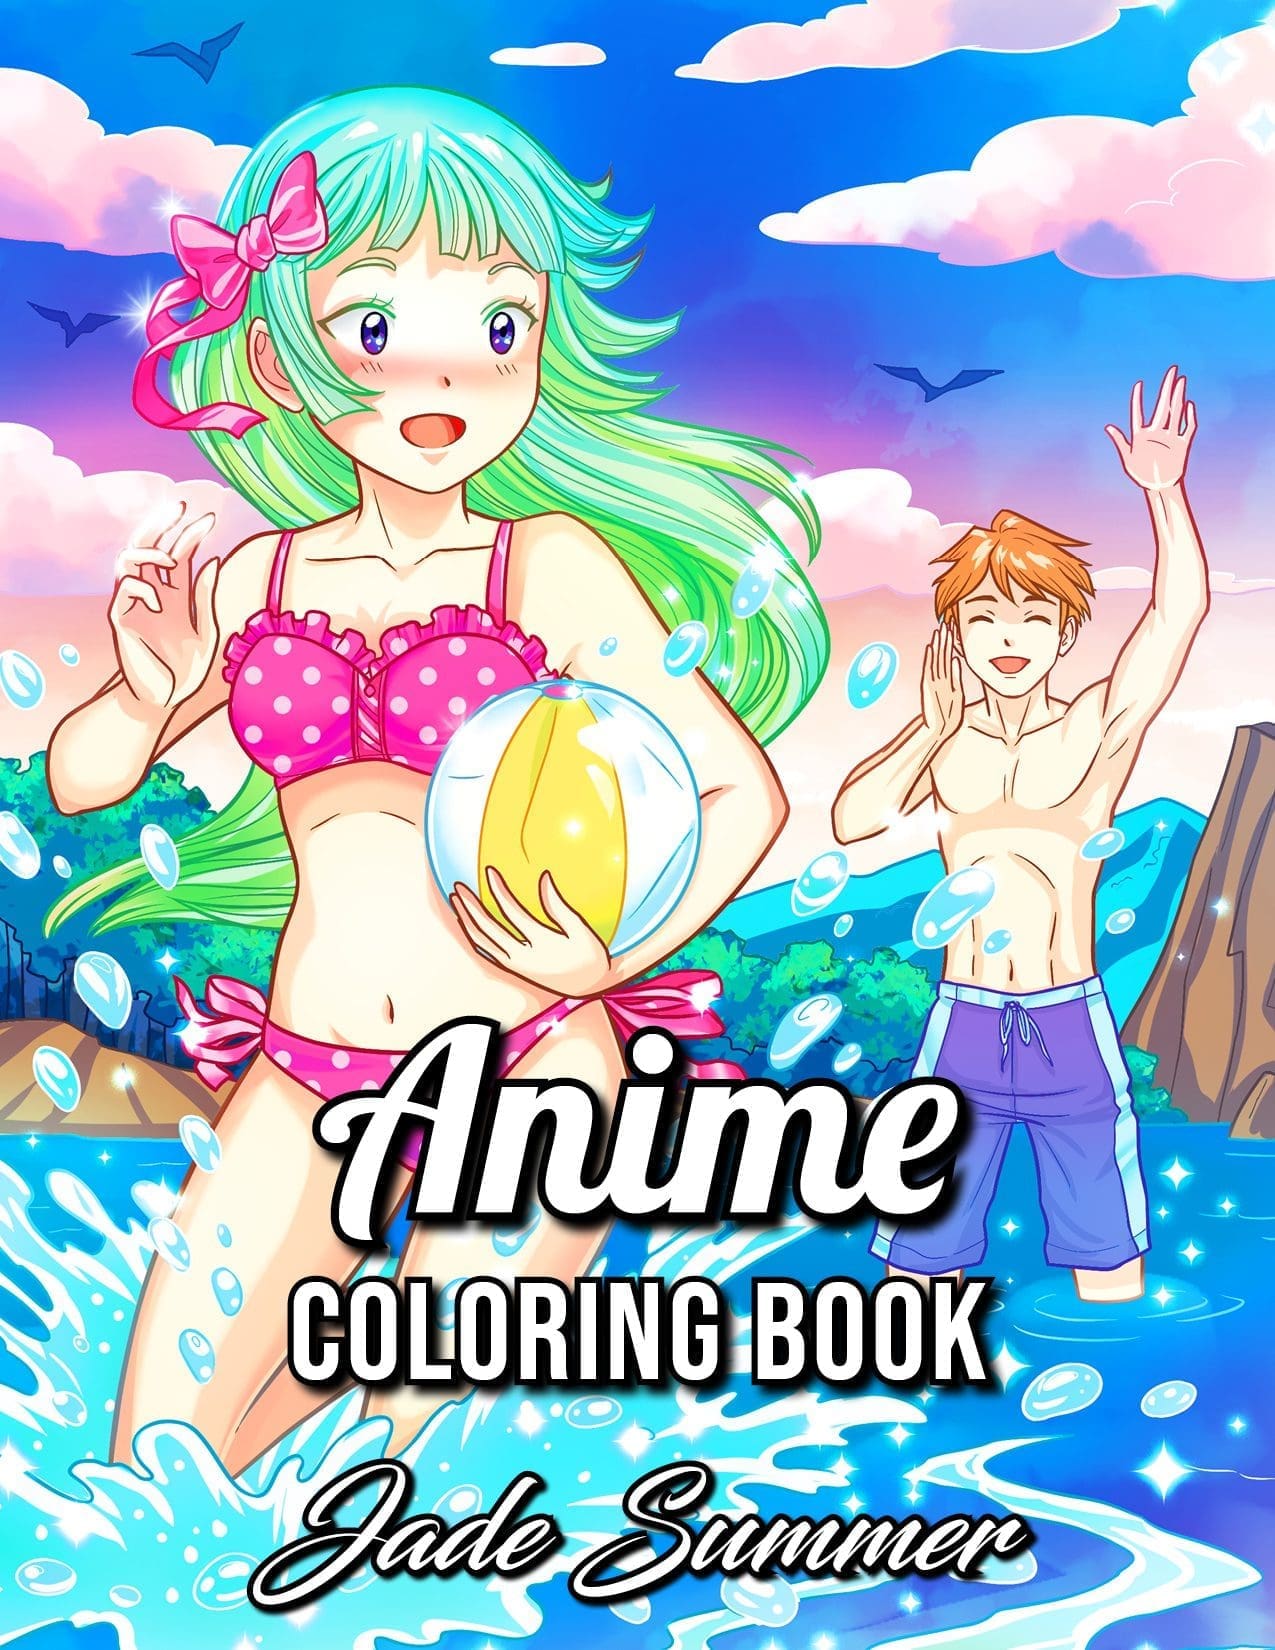 Design anime style coloring book pages by Atticisme  Fiverr